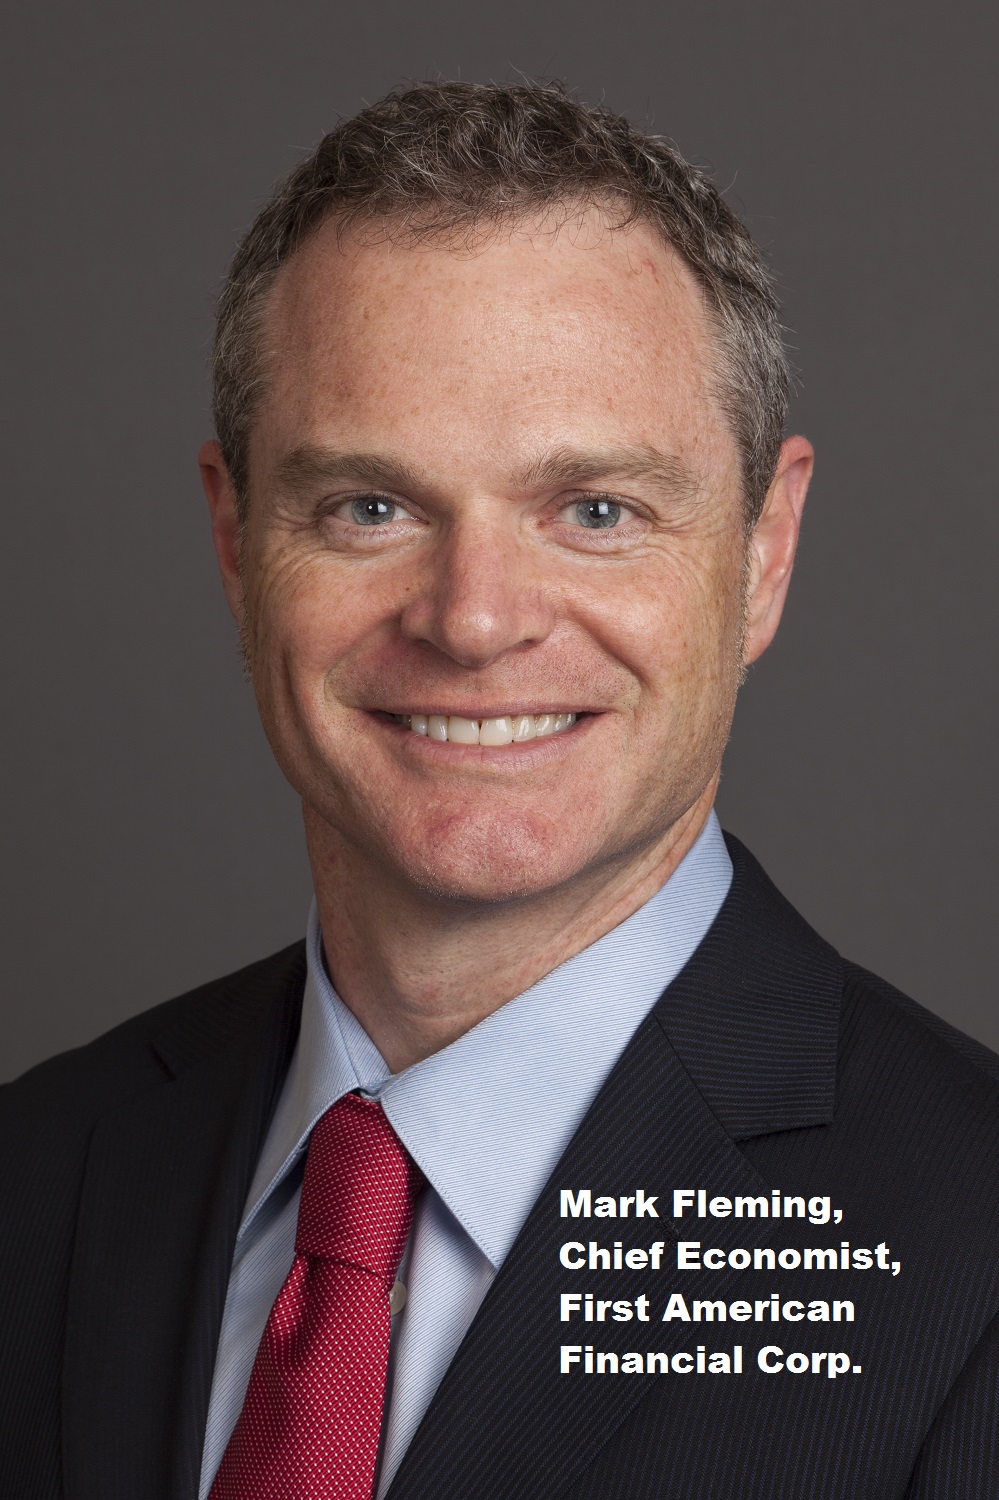 Mark Fleming, chief economist at First American Financial Corp.